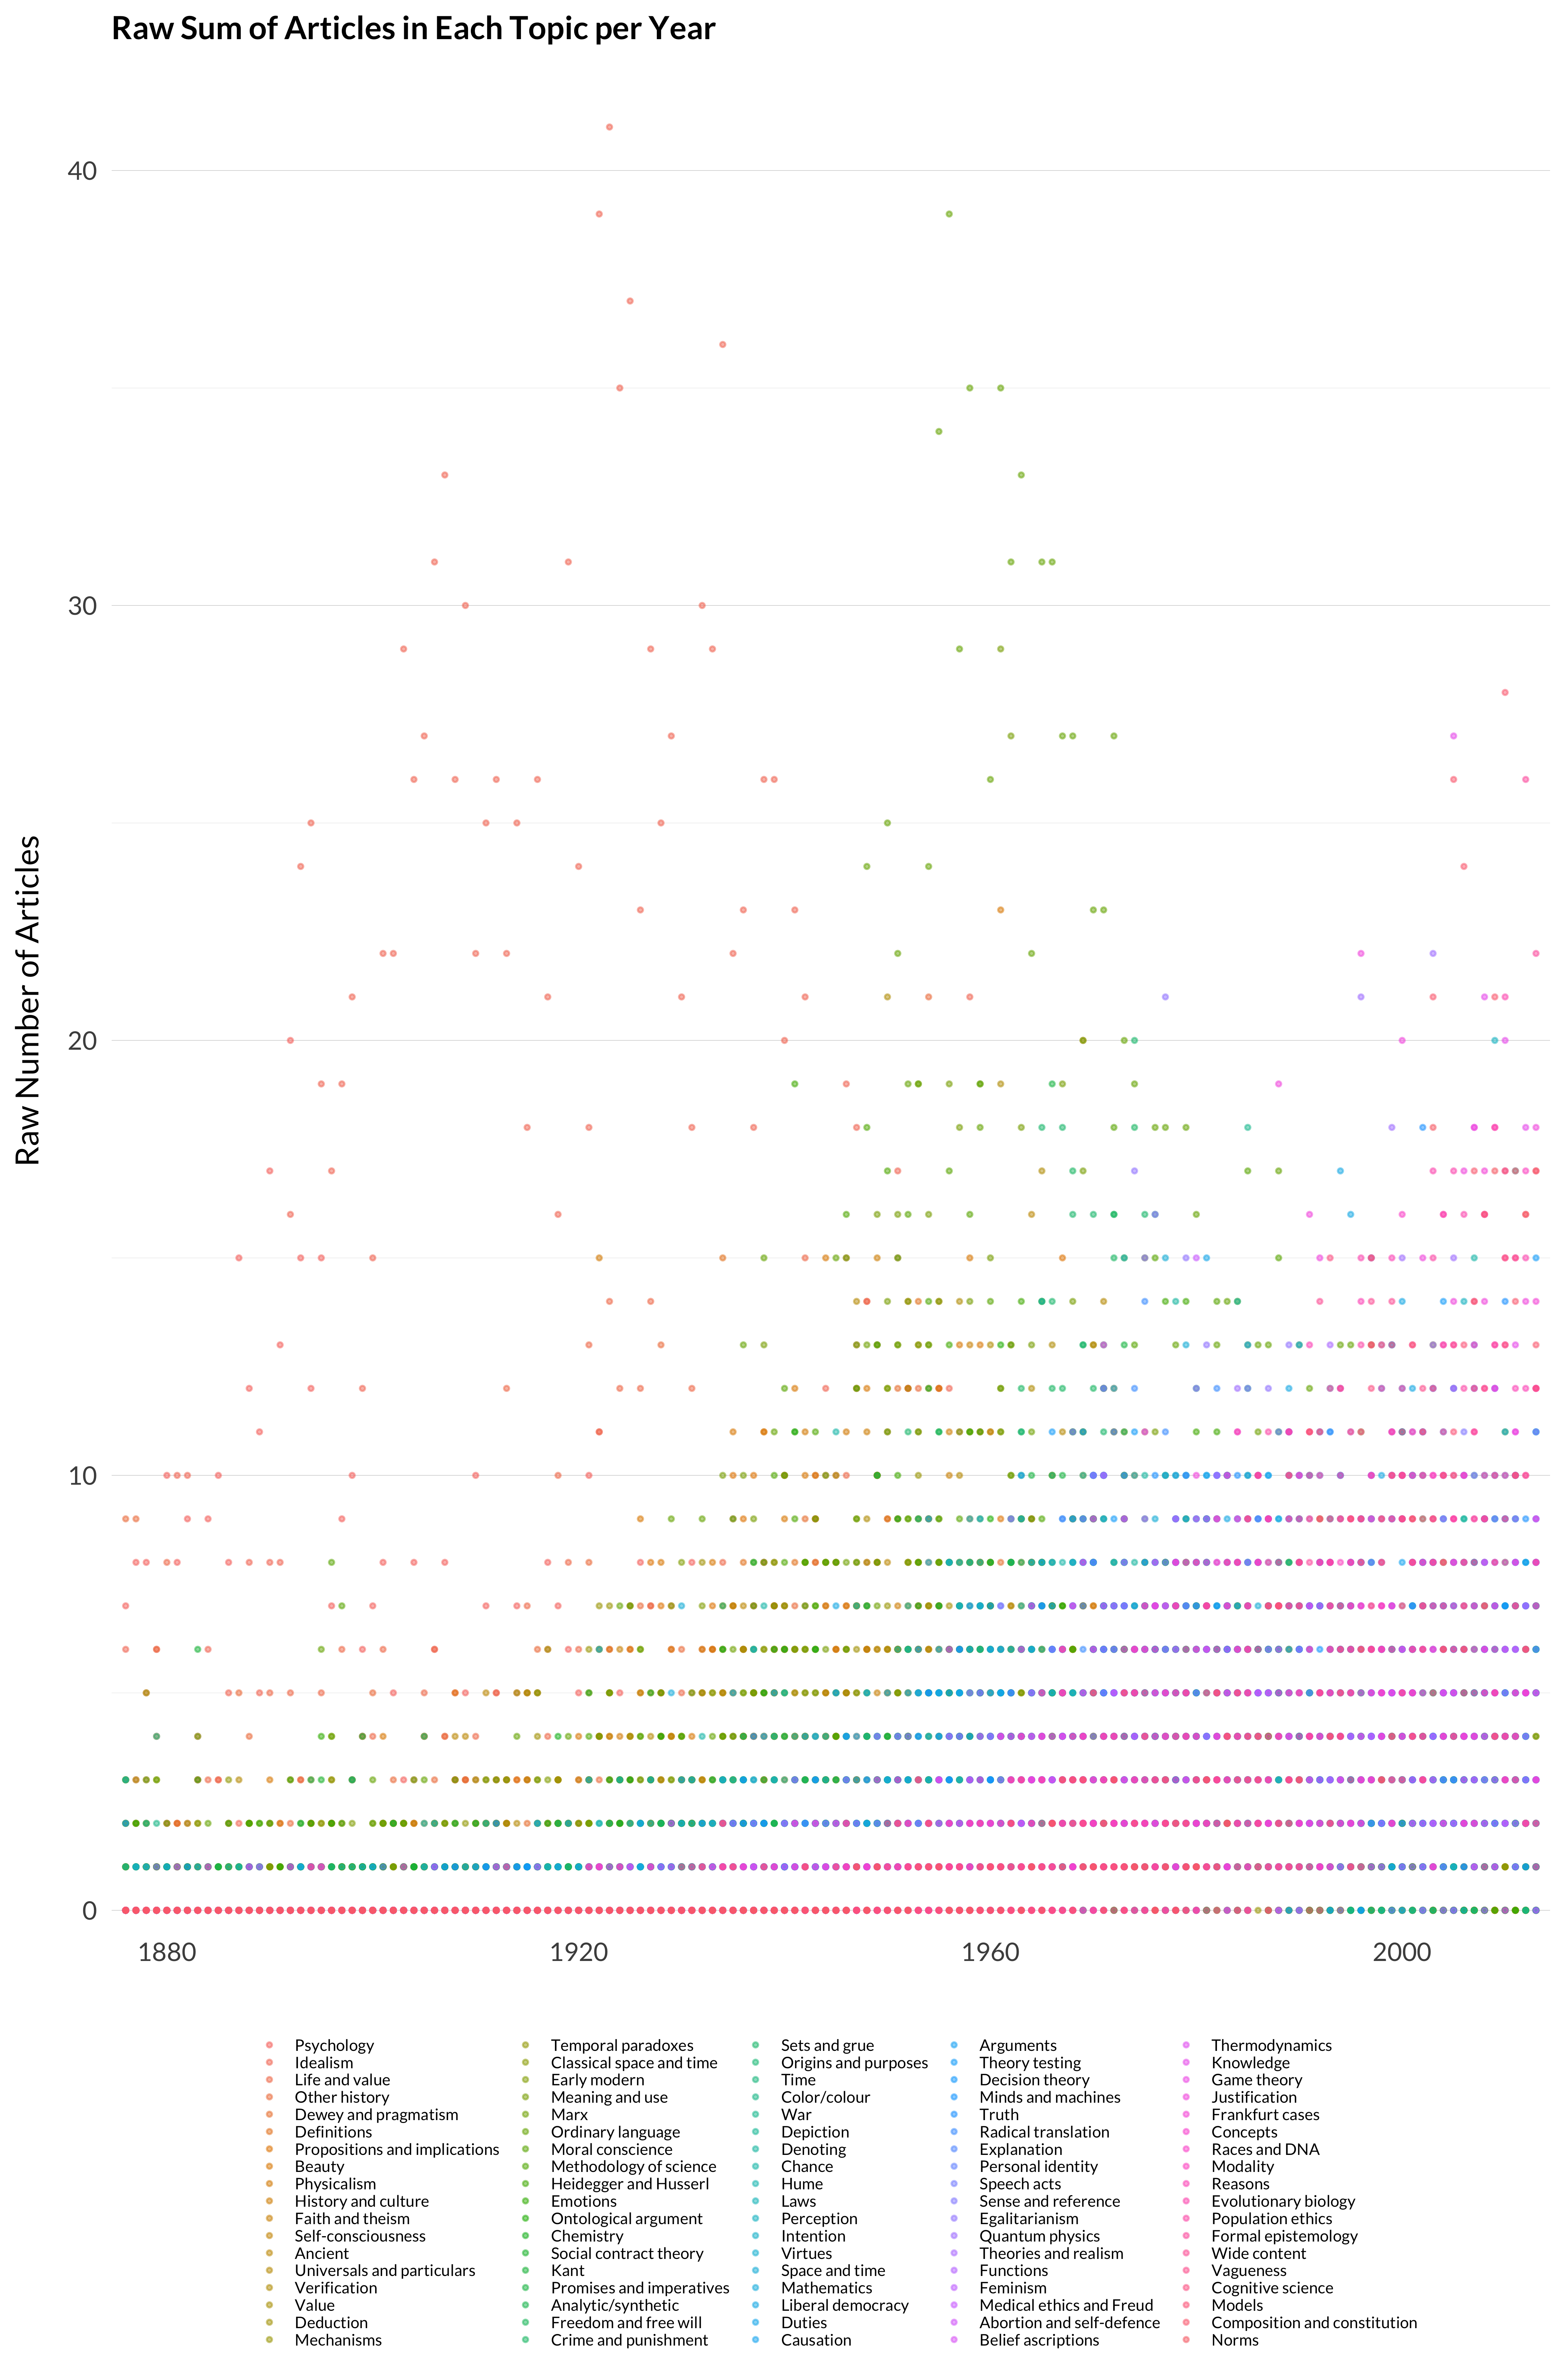 A plot showing the importance of all topics over time on a single graph, as measured by raw sum. The underlying data is in Table B.2. It is mostly a mess of dots that doesn't show very much, but what information can be gleaned by looking is described in the text below.